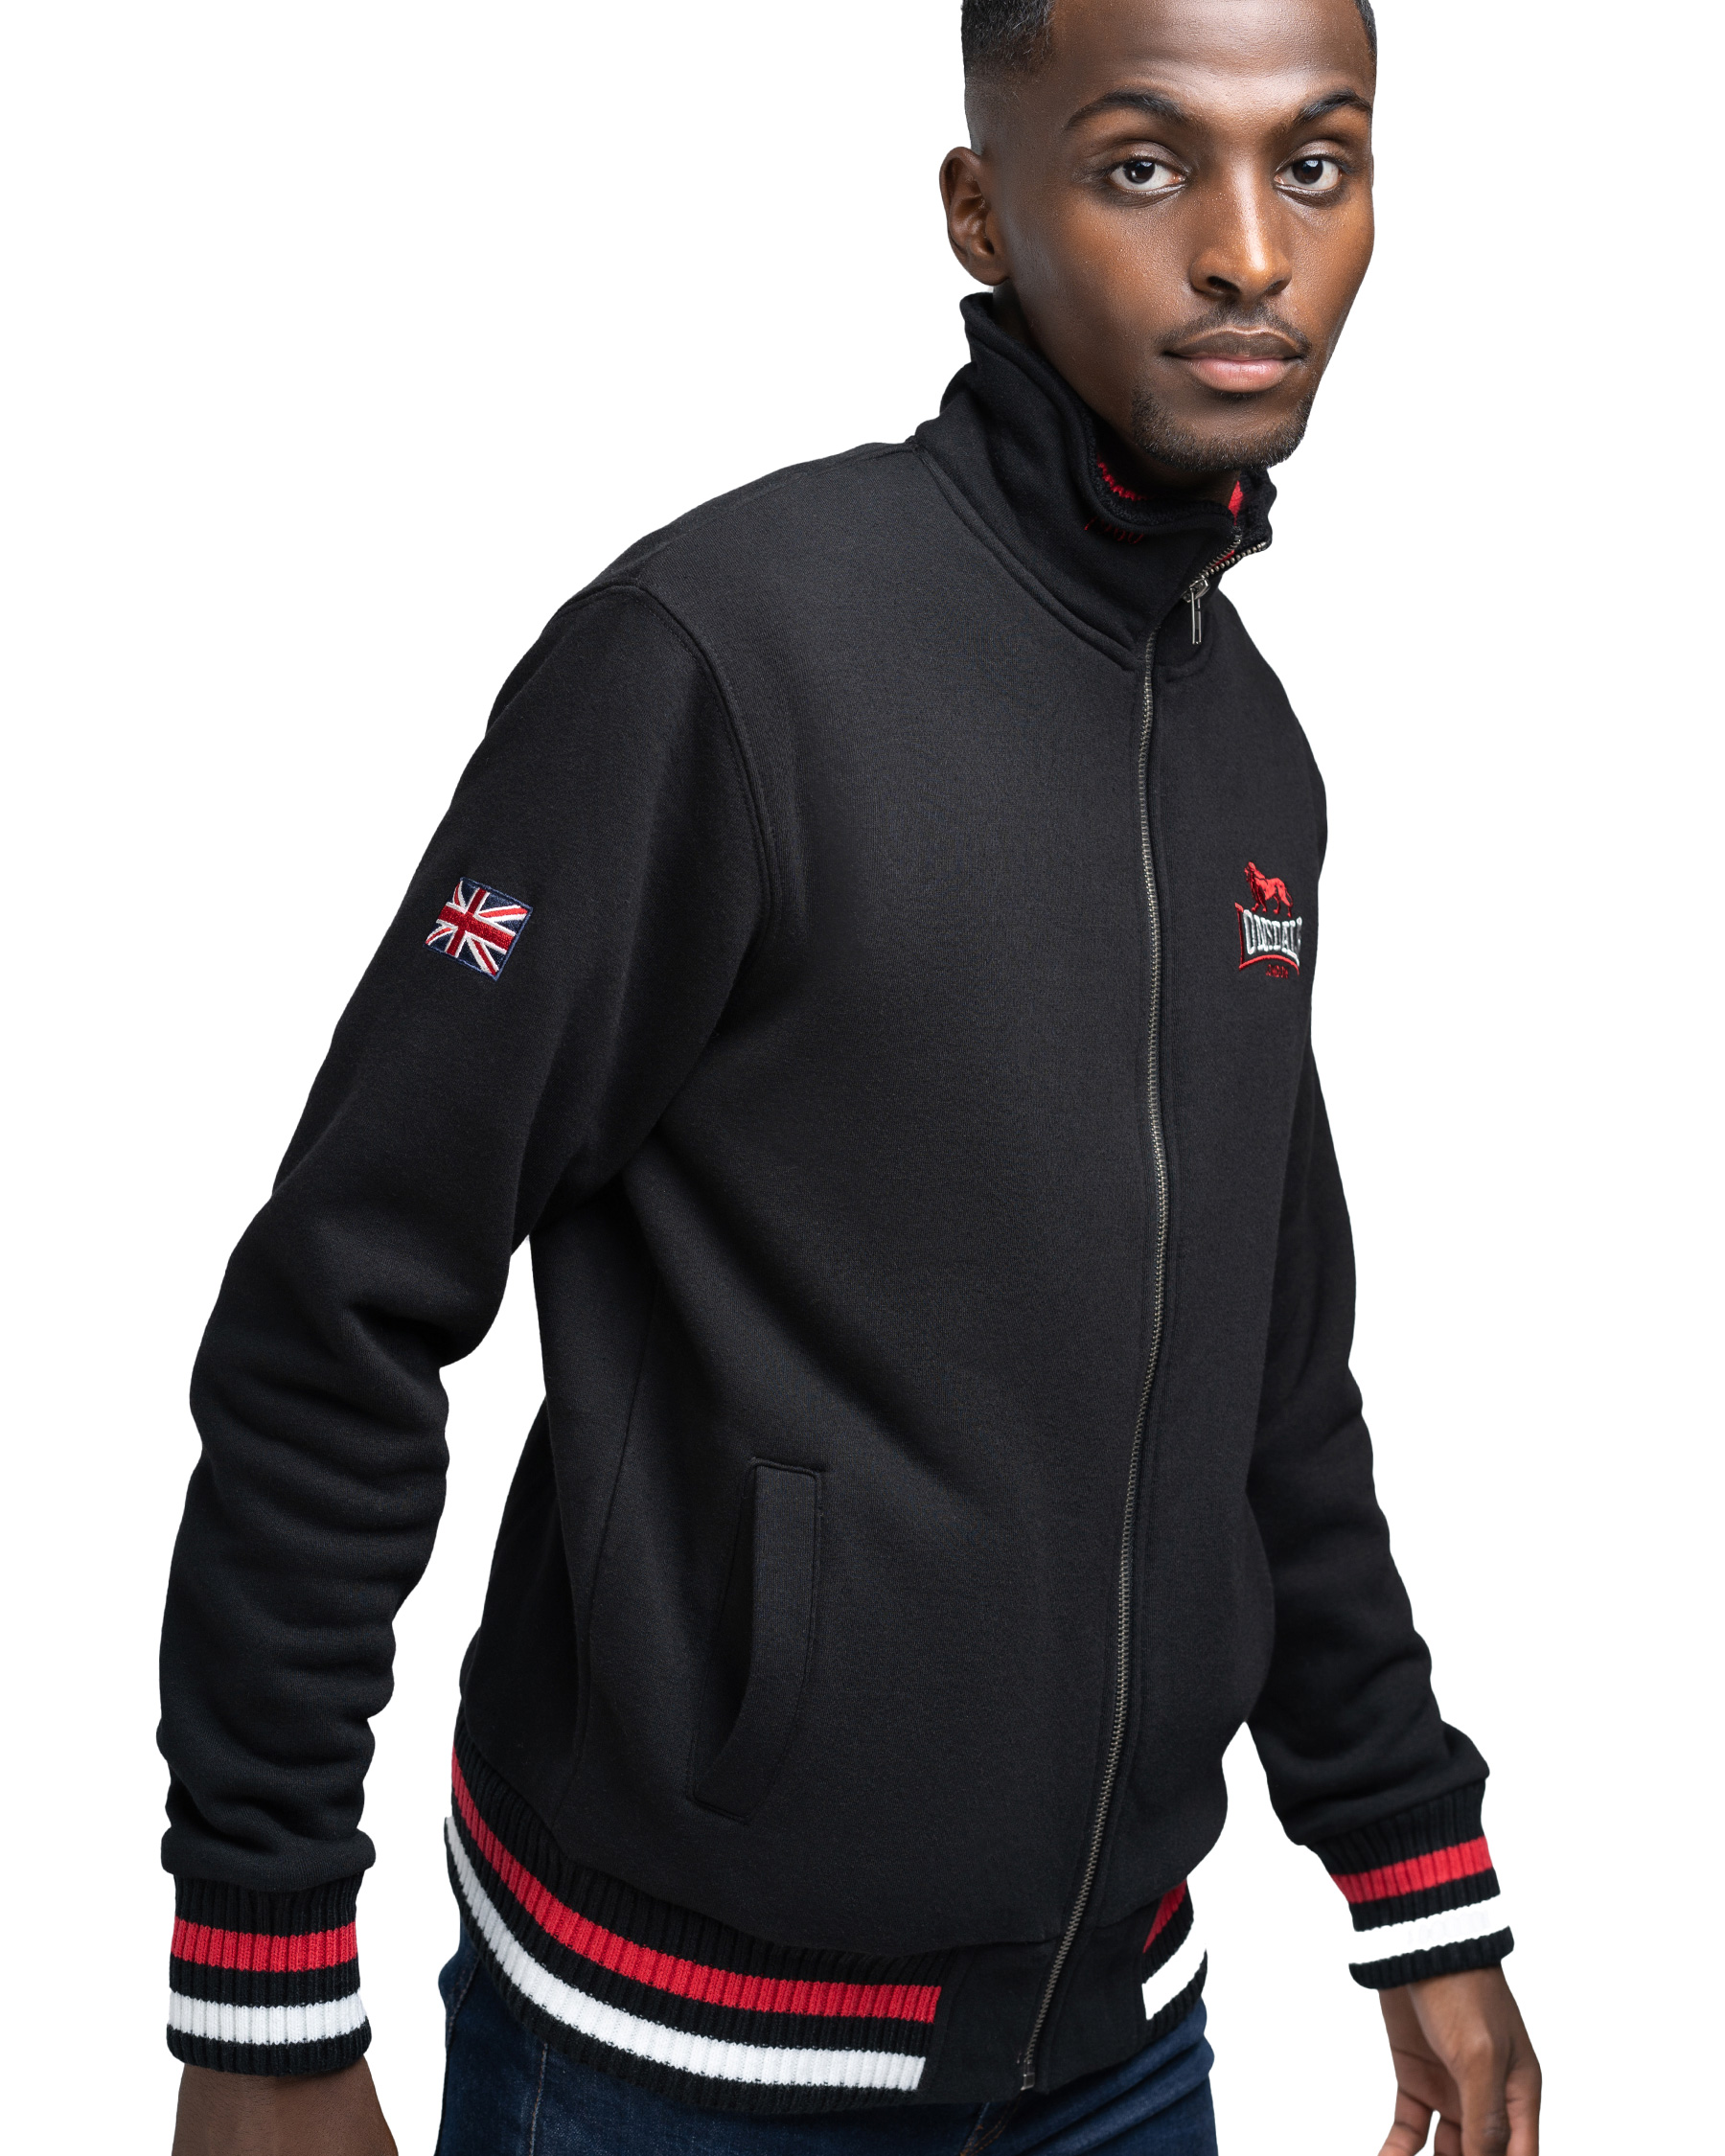 Lonsdale sweat jacket Dover